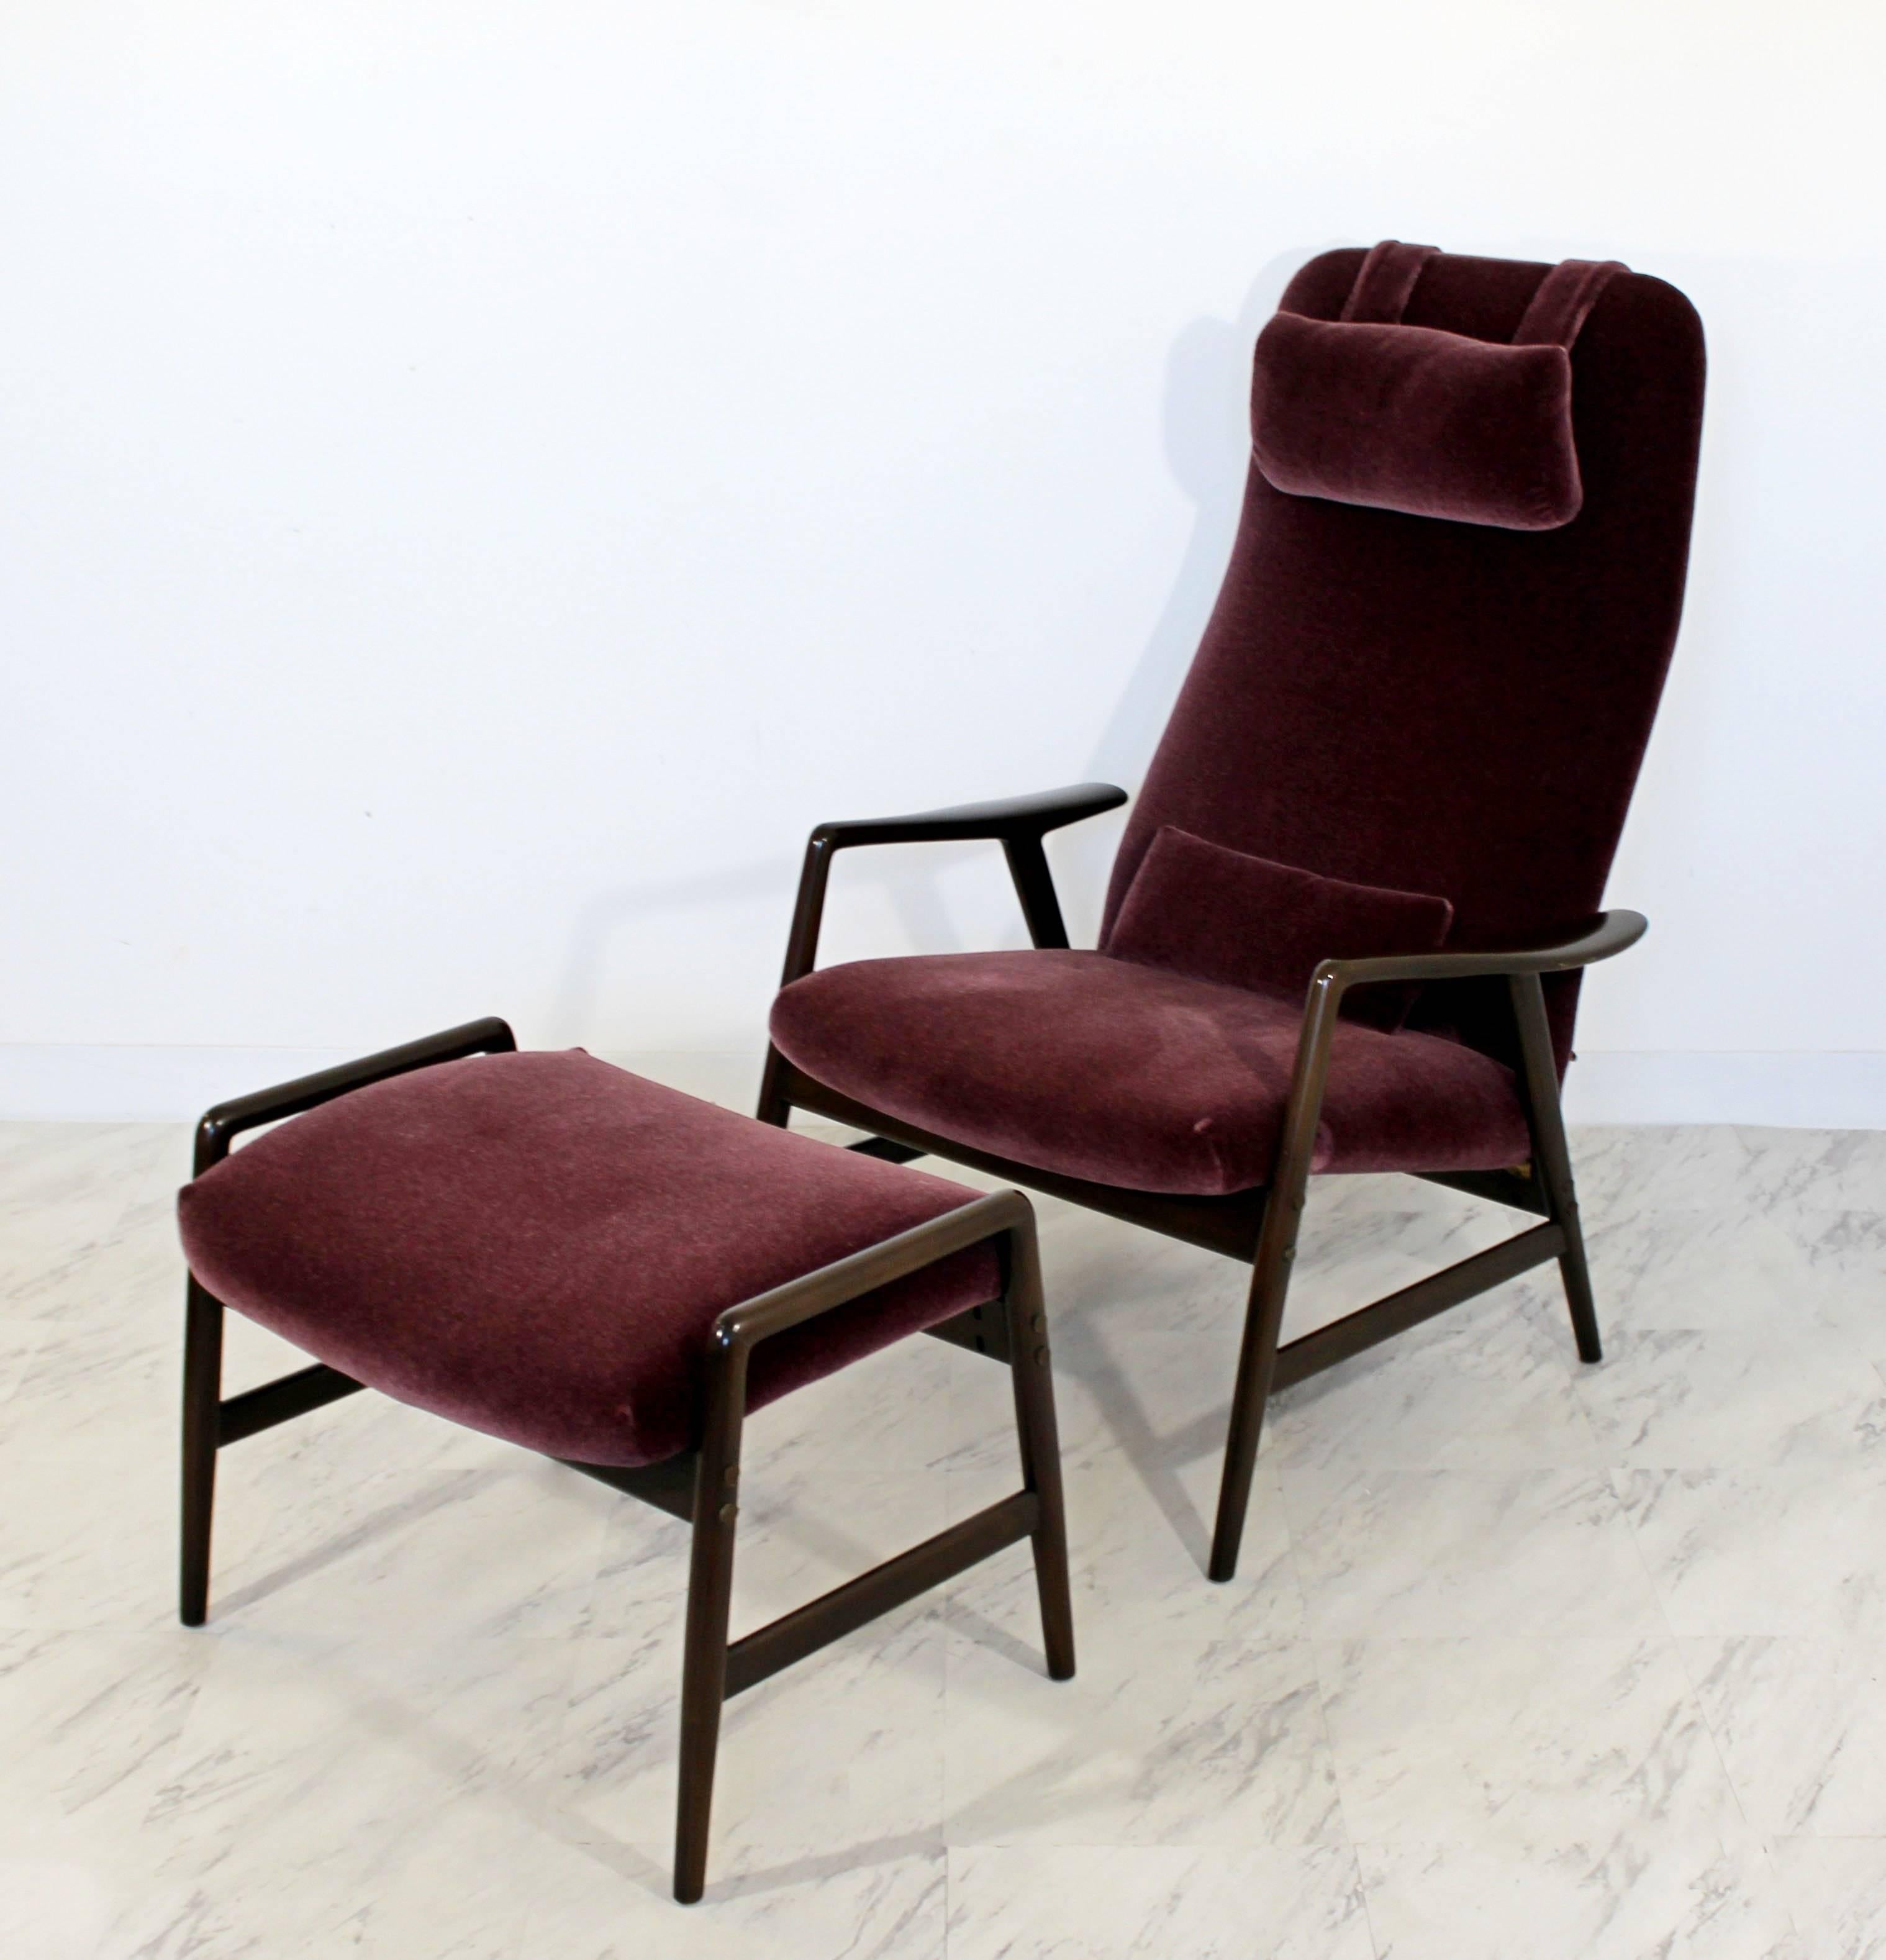 For your consideration is a magnificent, high back, reclining lounge chair and ottoman, professionally reupholstered in a deep purple velvet mohair made in Sweden by DUX, circa 1960s. In excellent condition. The dimensions of the chair are 29